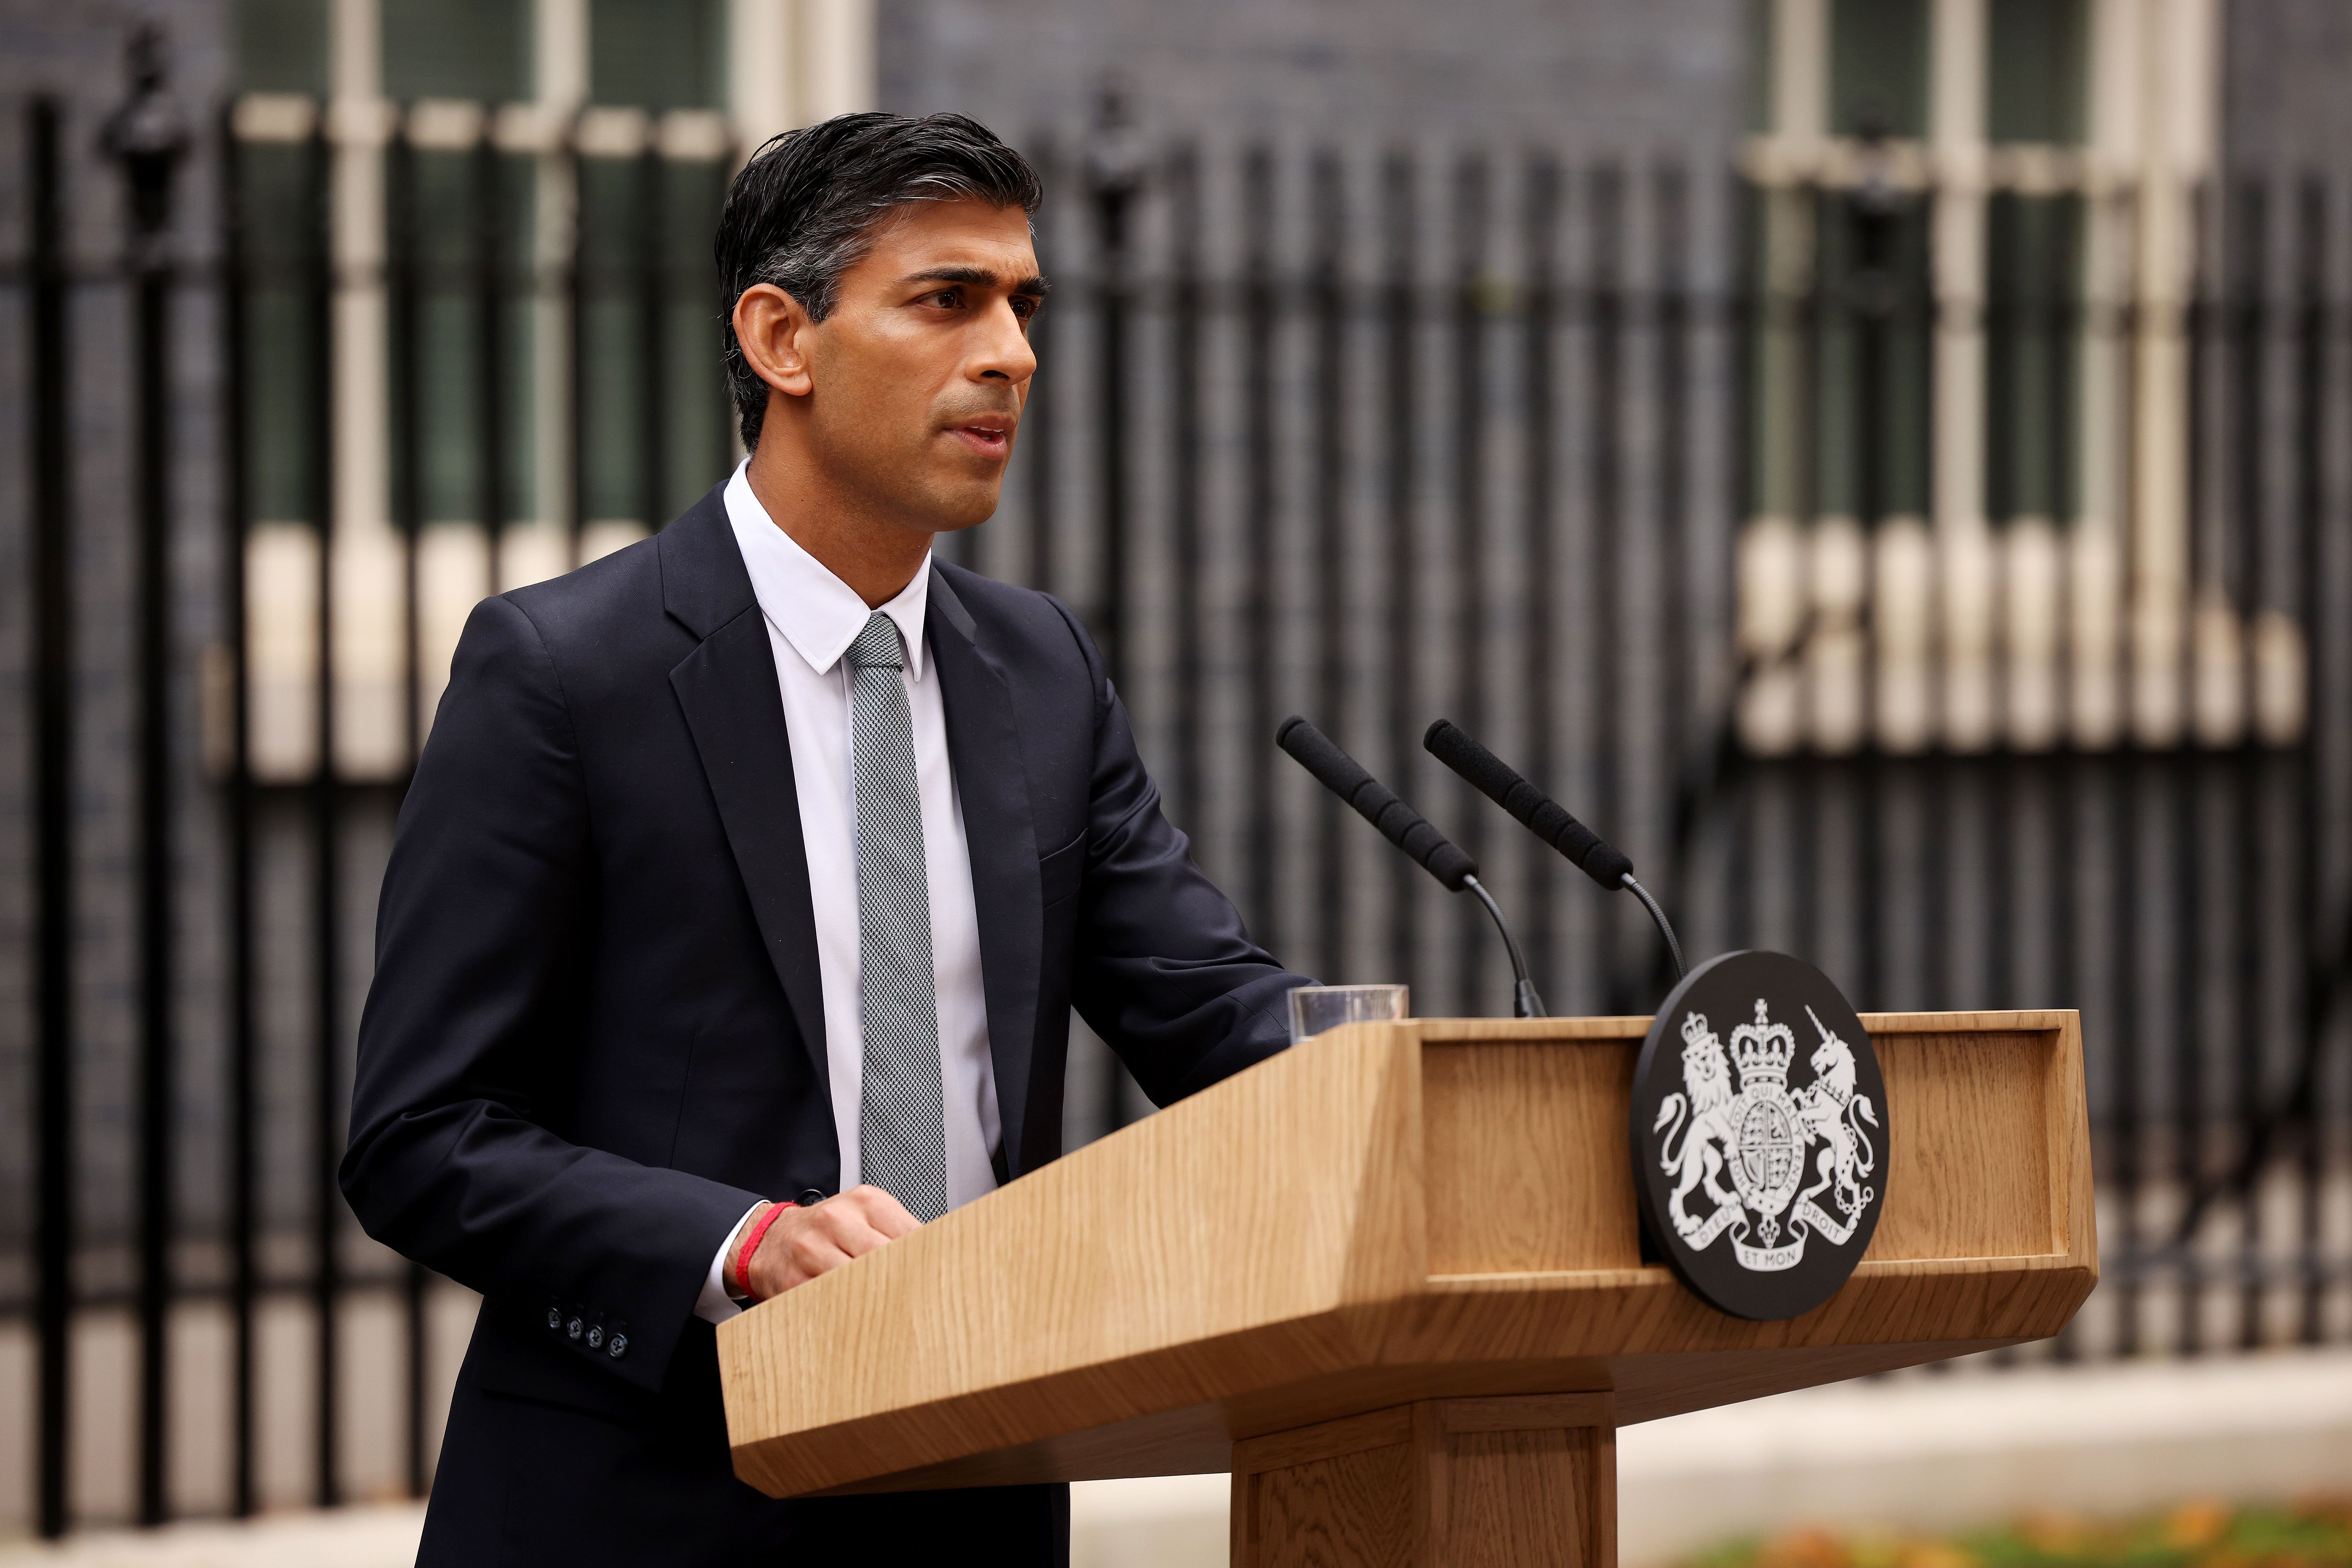 October, 2022: Rishi makes a statement outside Number 10 Downing Street after taking office as the UK's 57th Prime Minister